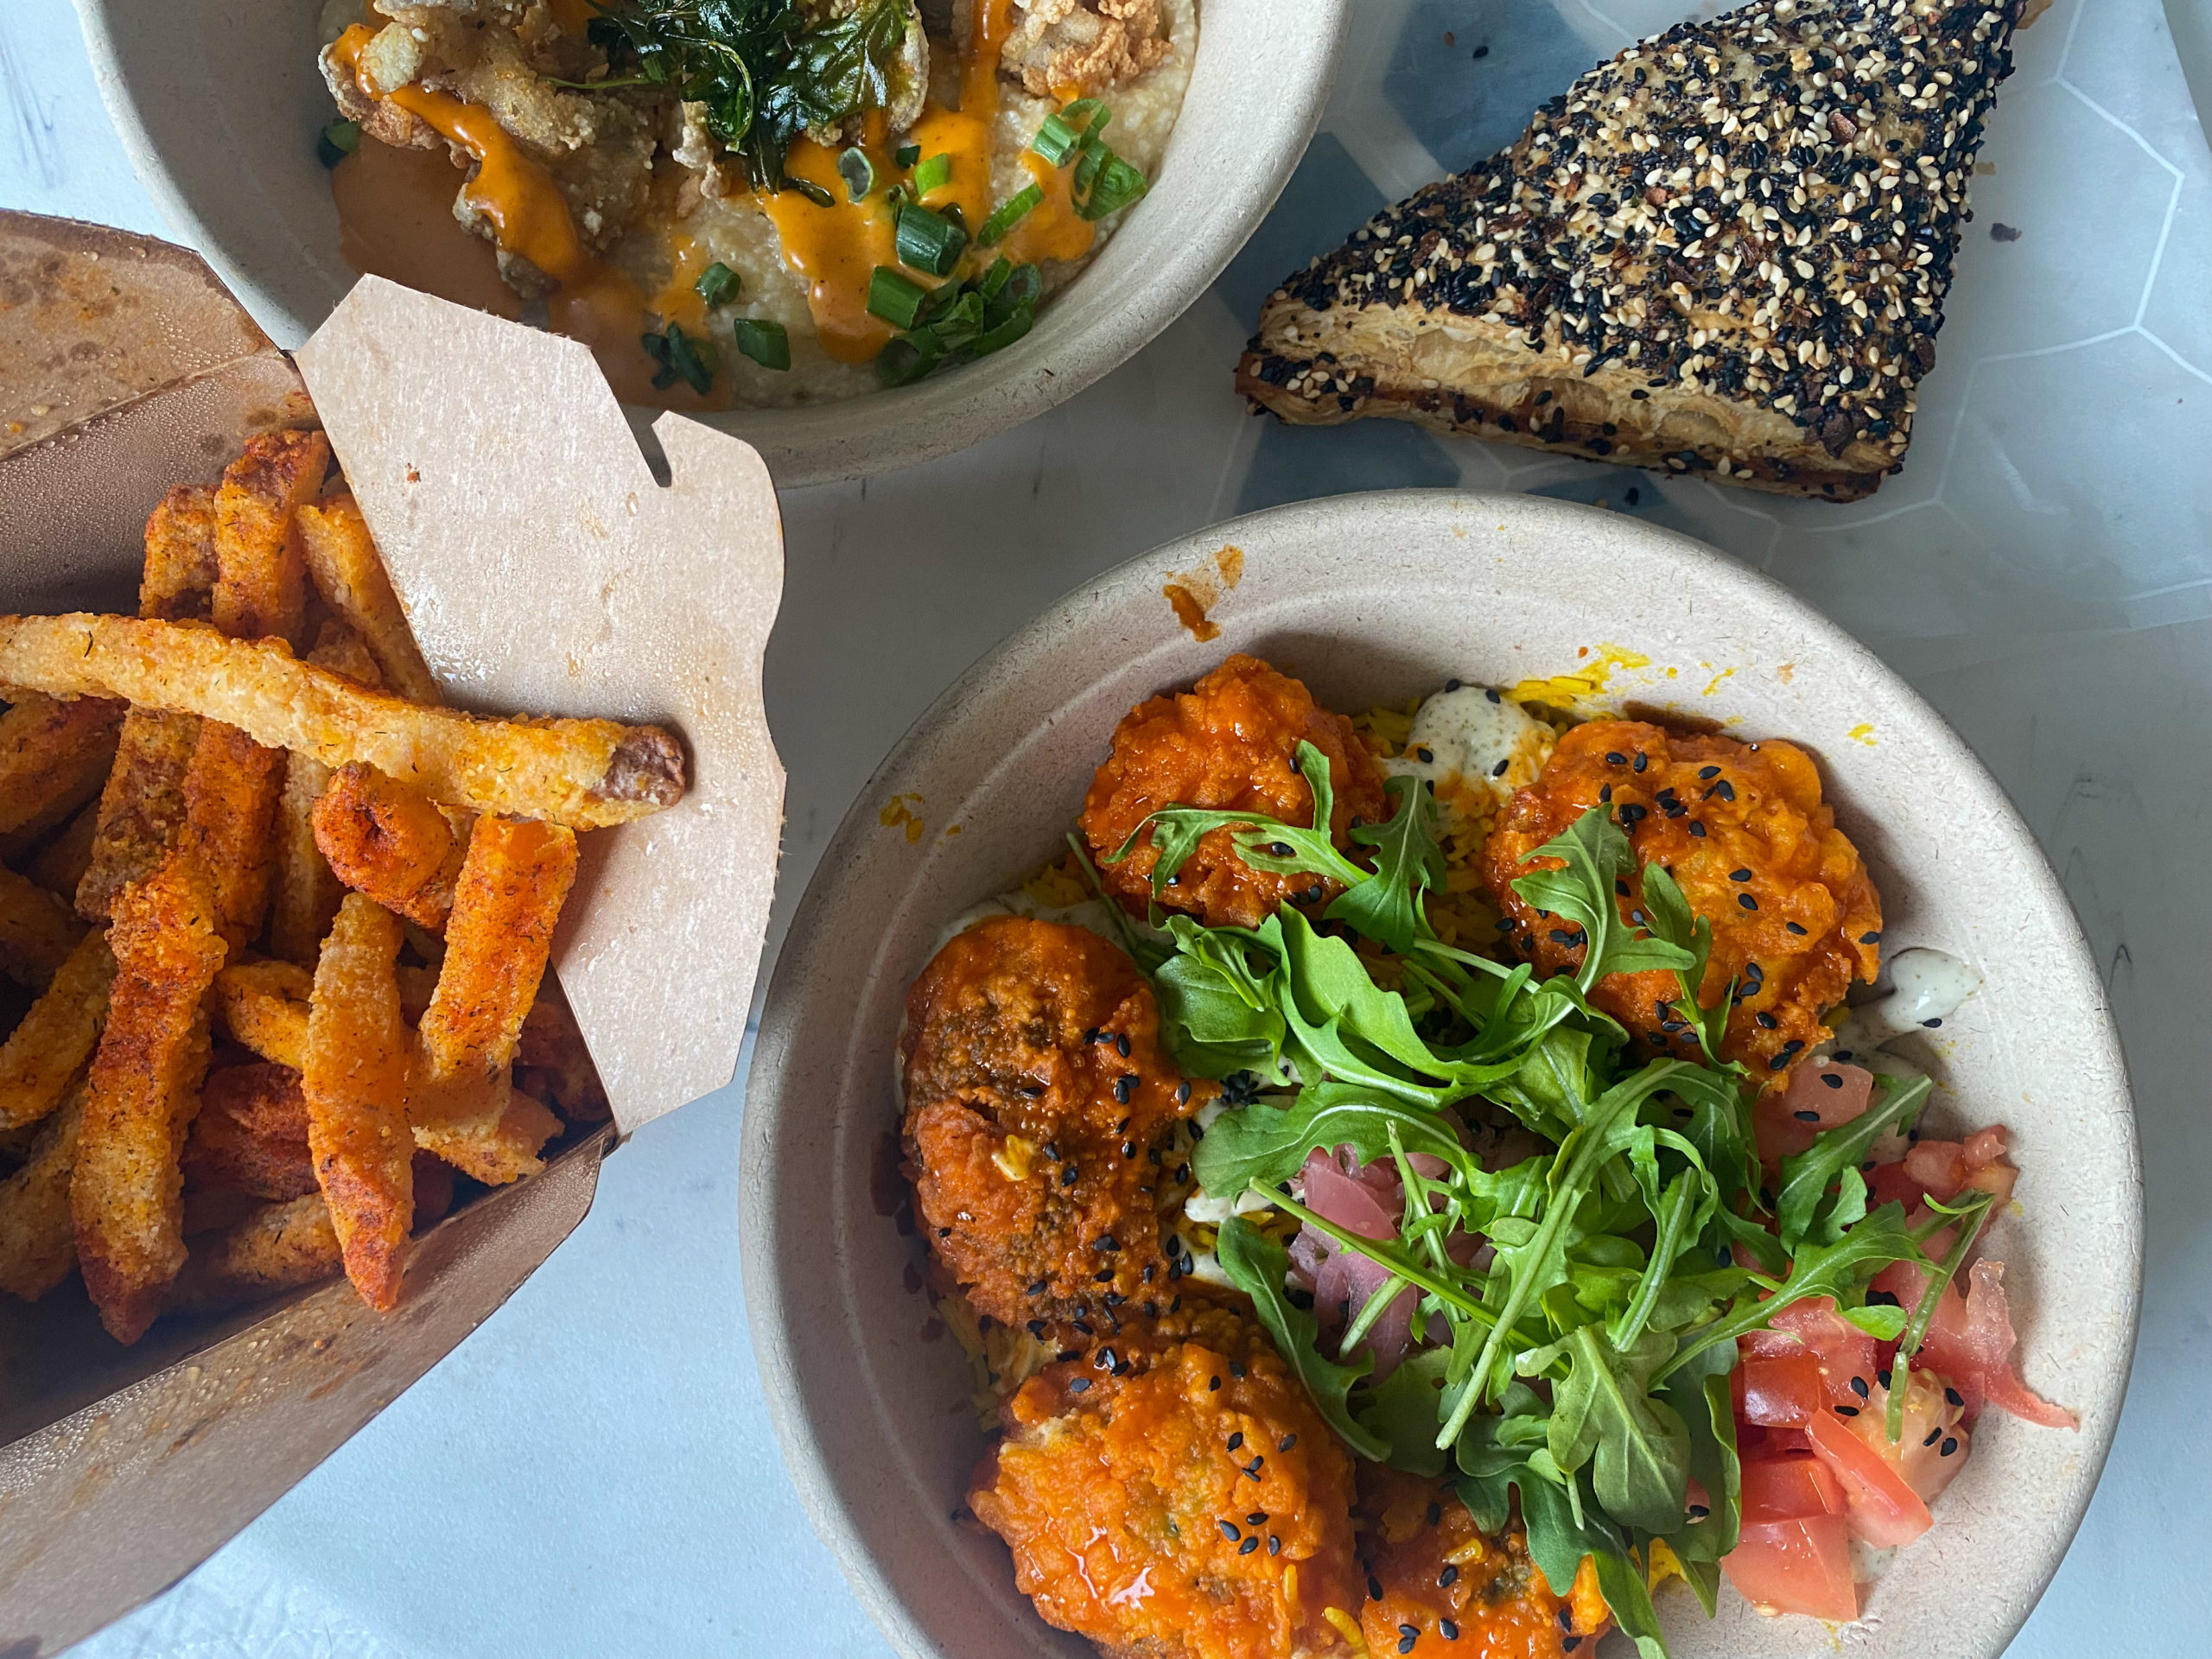 An array of incredible vegan offerings from Freya's Diner